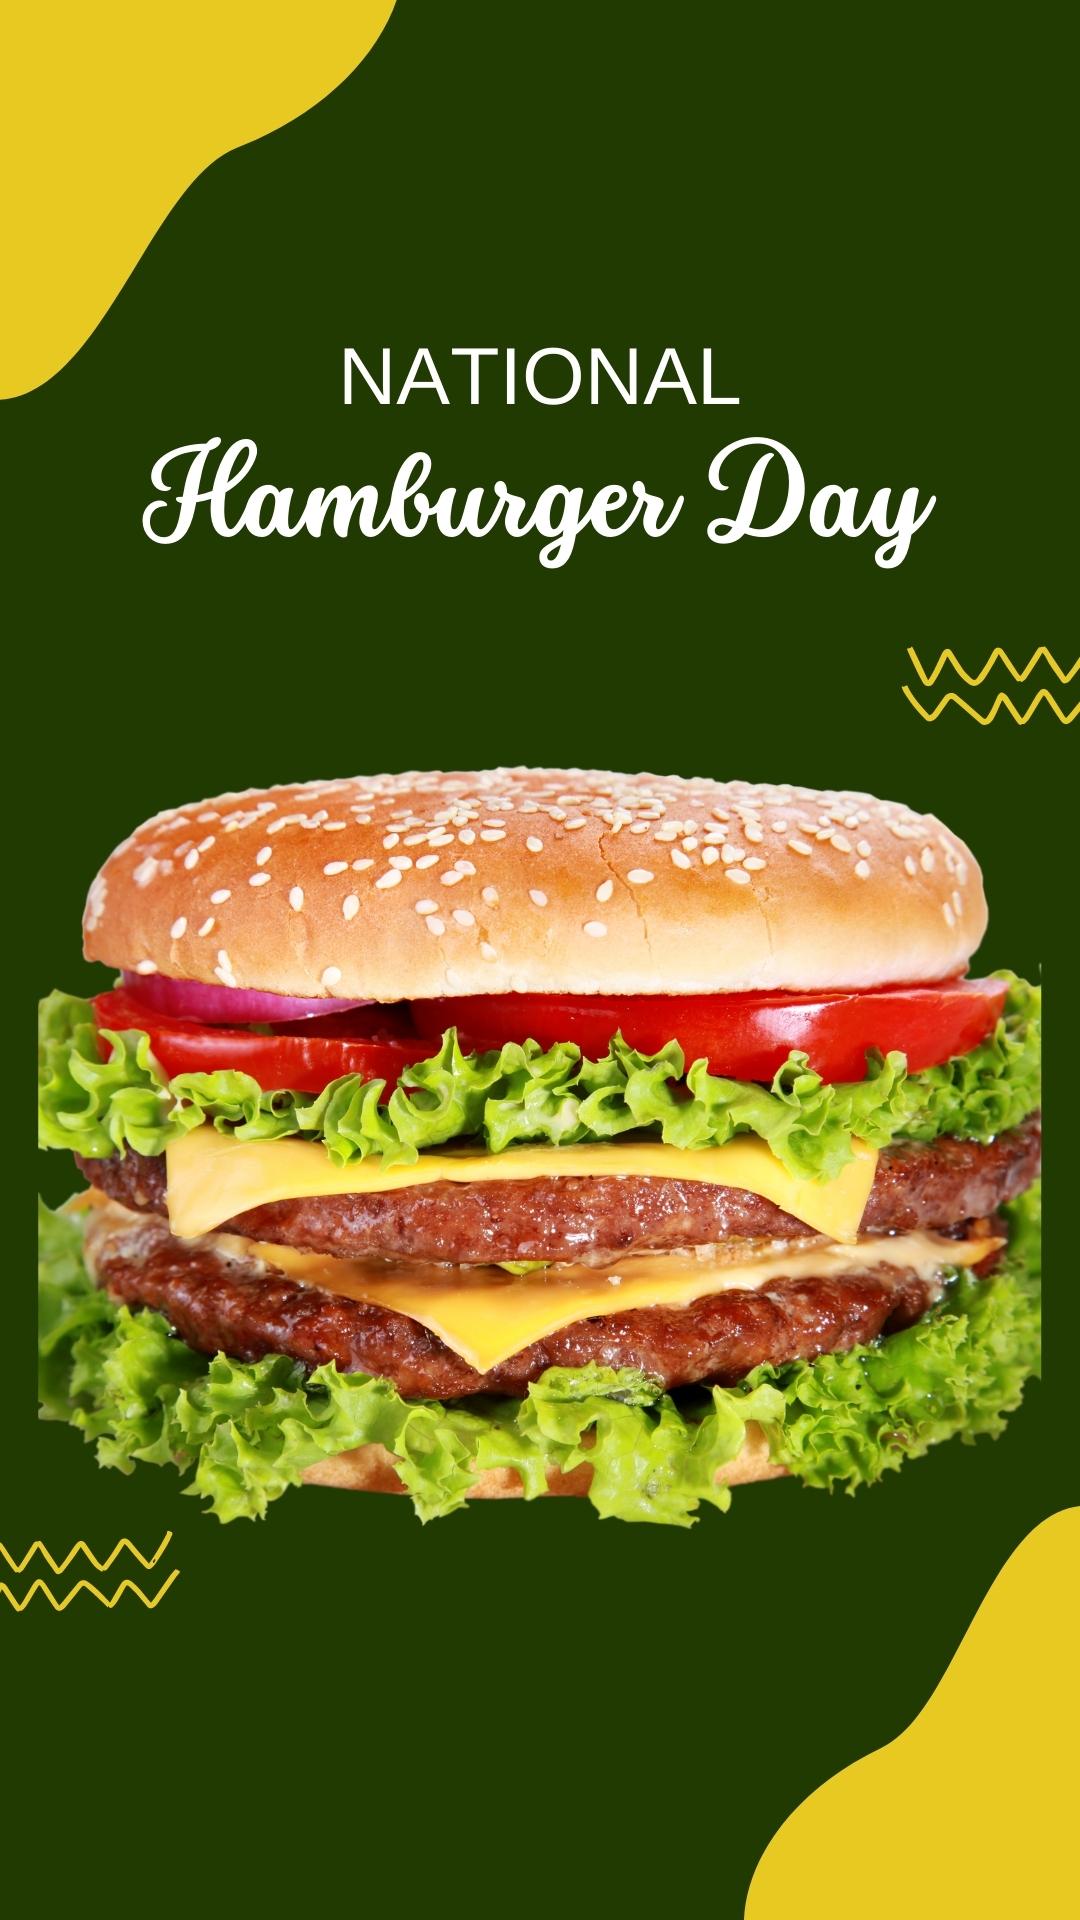 best national hamburger day wishes images for instagram post (44)